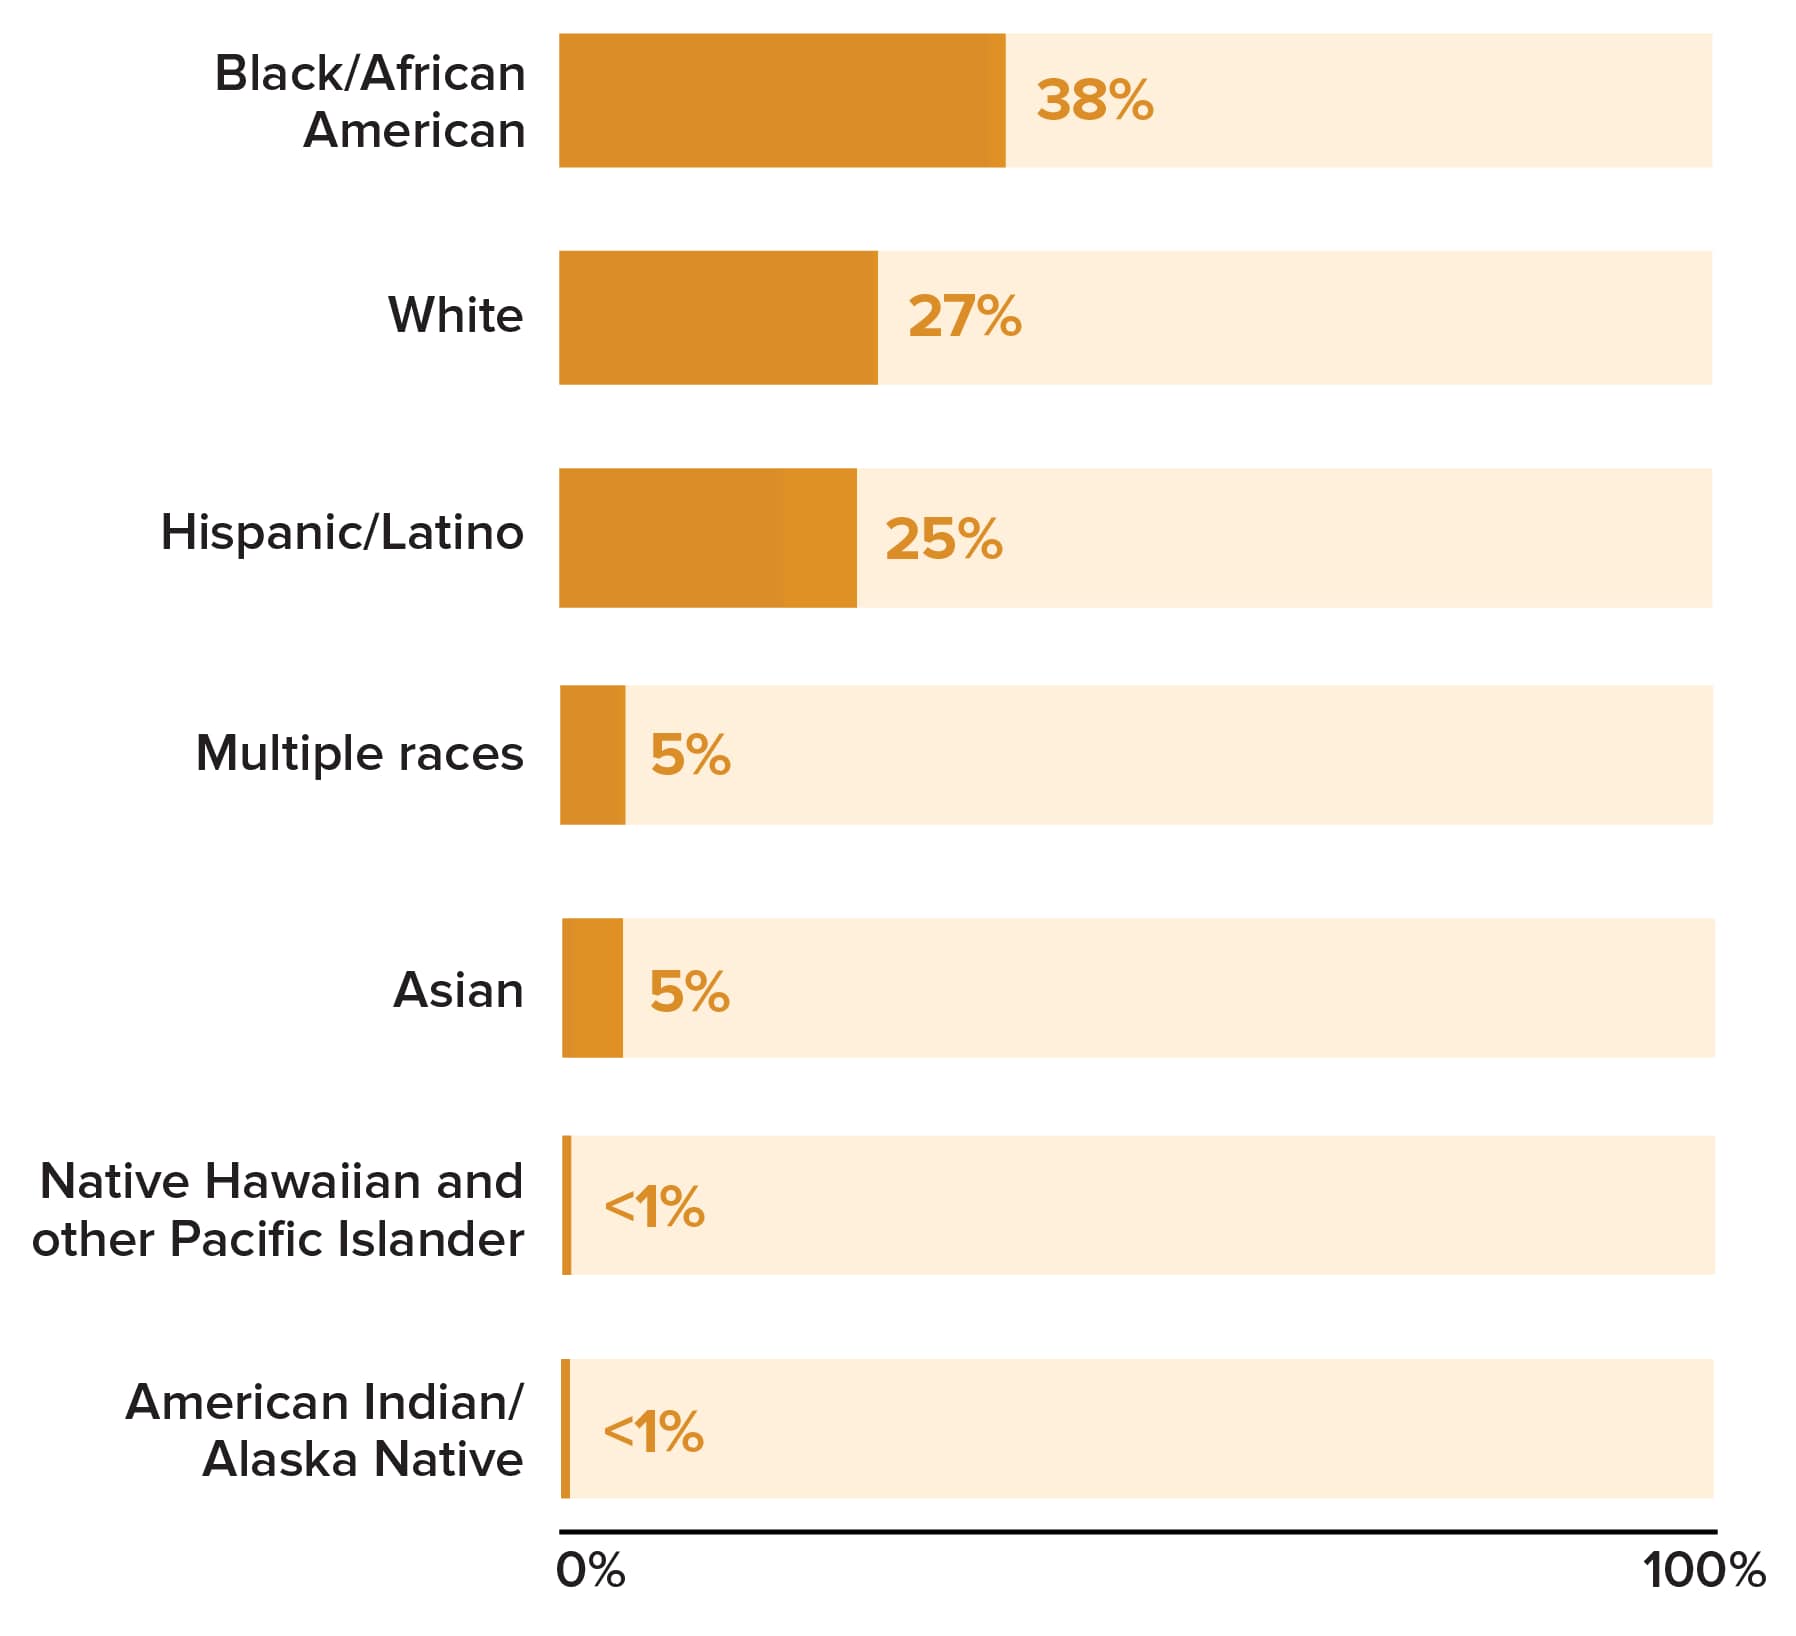 Bar graph showing the race/ethnicity distribution of men who have sex with men; the most common racial/ethnic group was Black/African American.